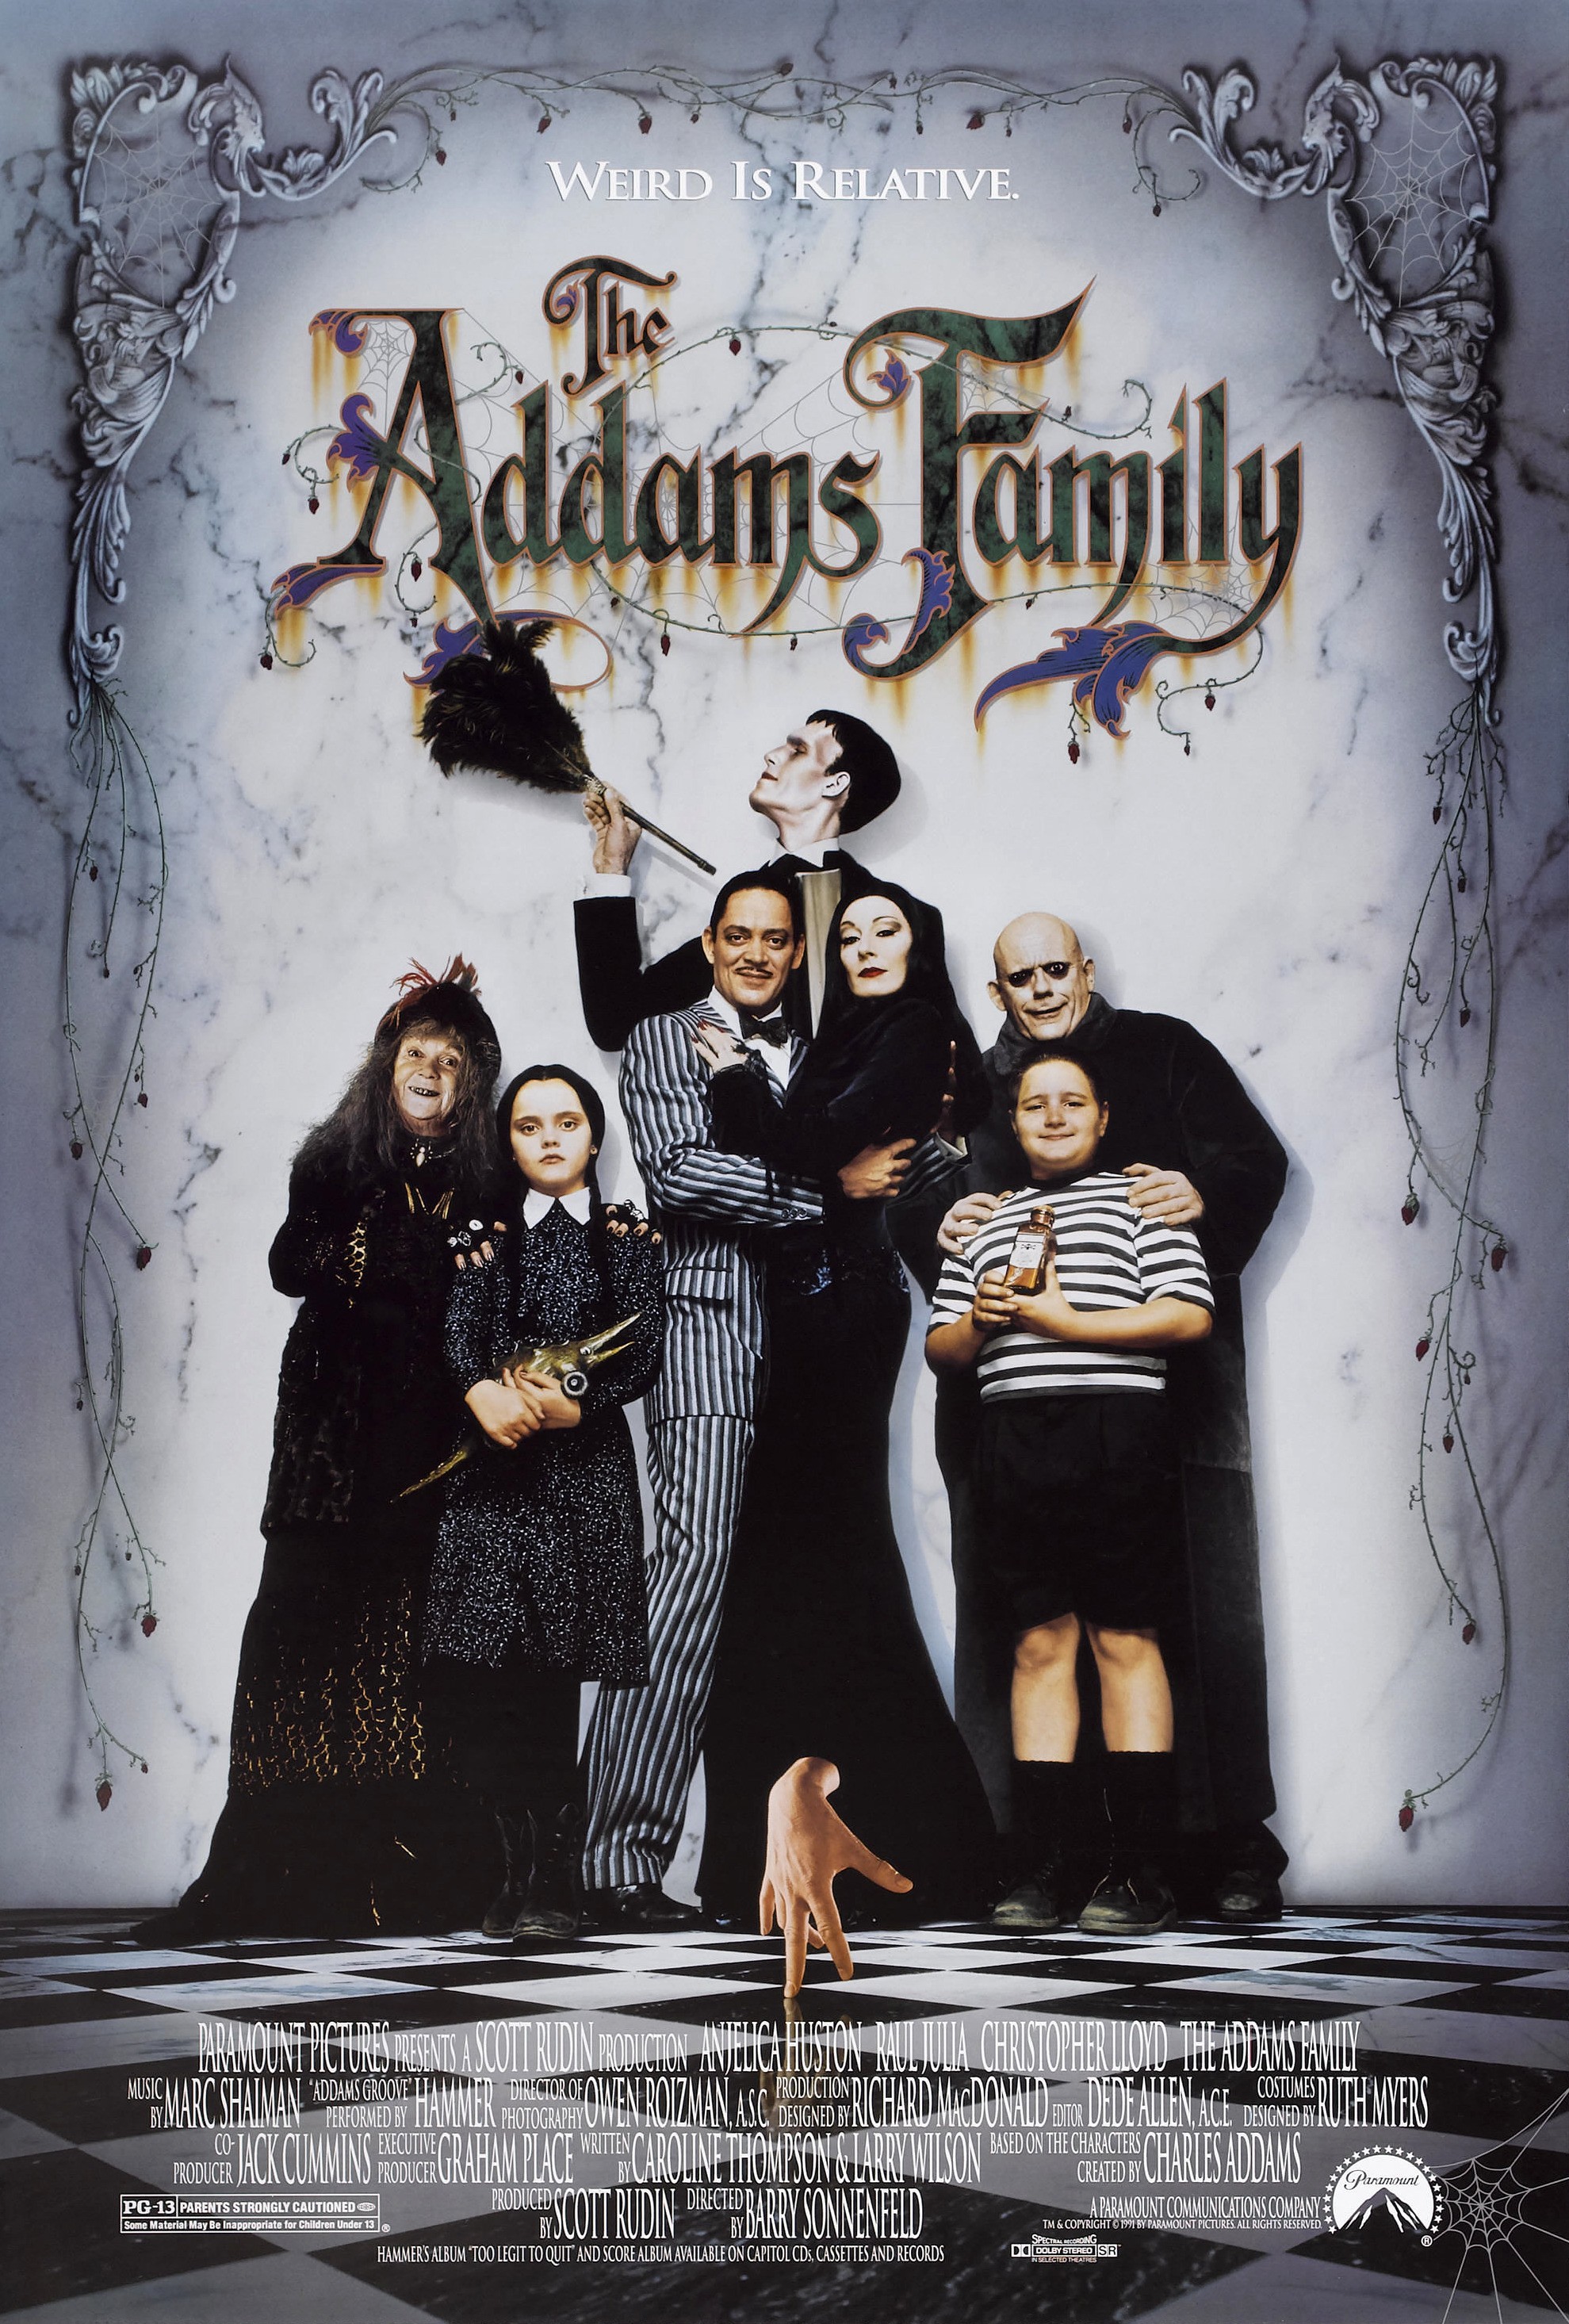 The Addams Family Poster 2 Internet Movie Poster Awards Gallery Family Movie Poster Best Halloween Movies Addams Family Movie